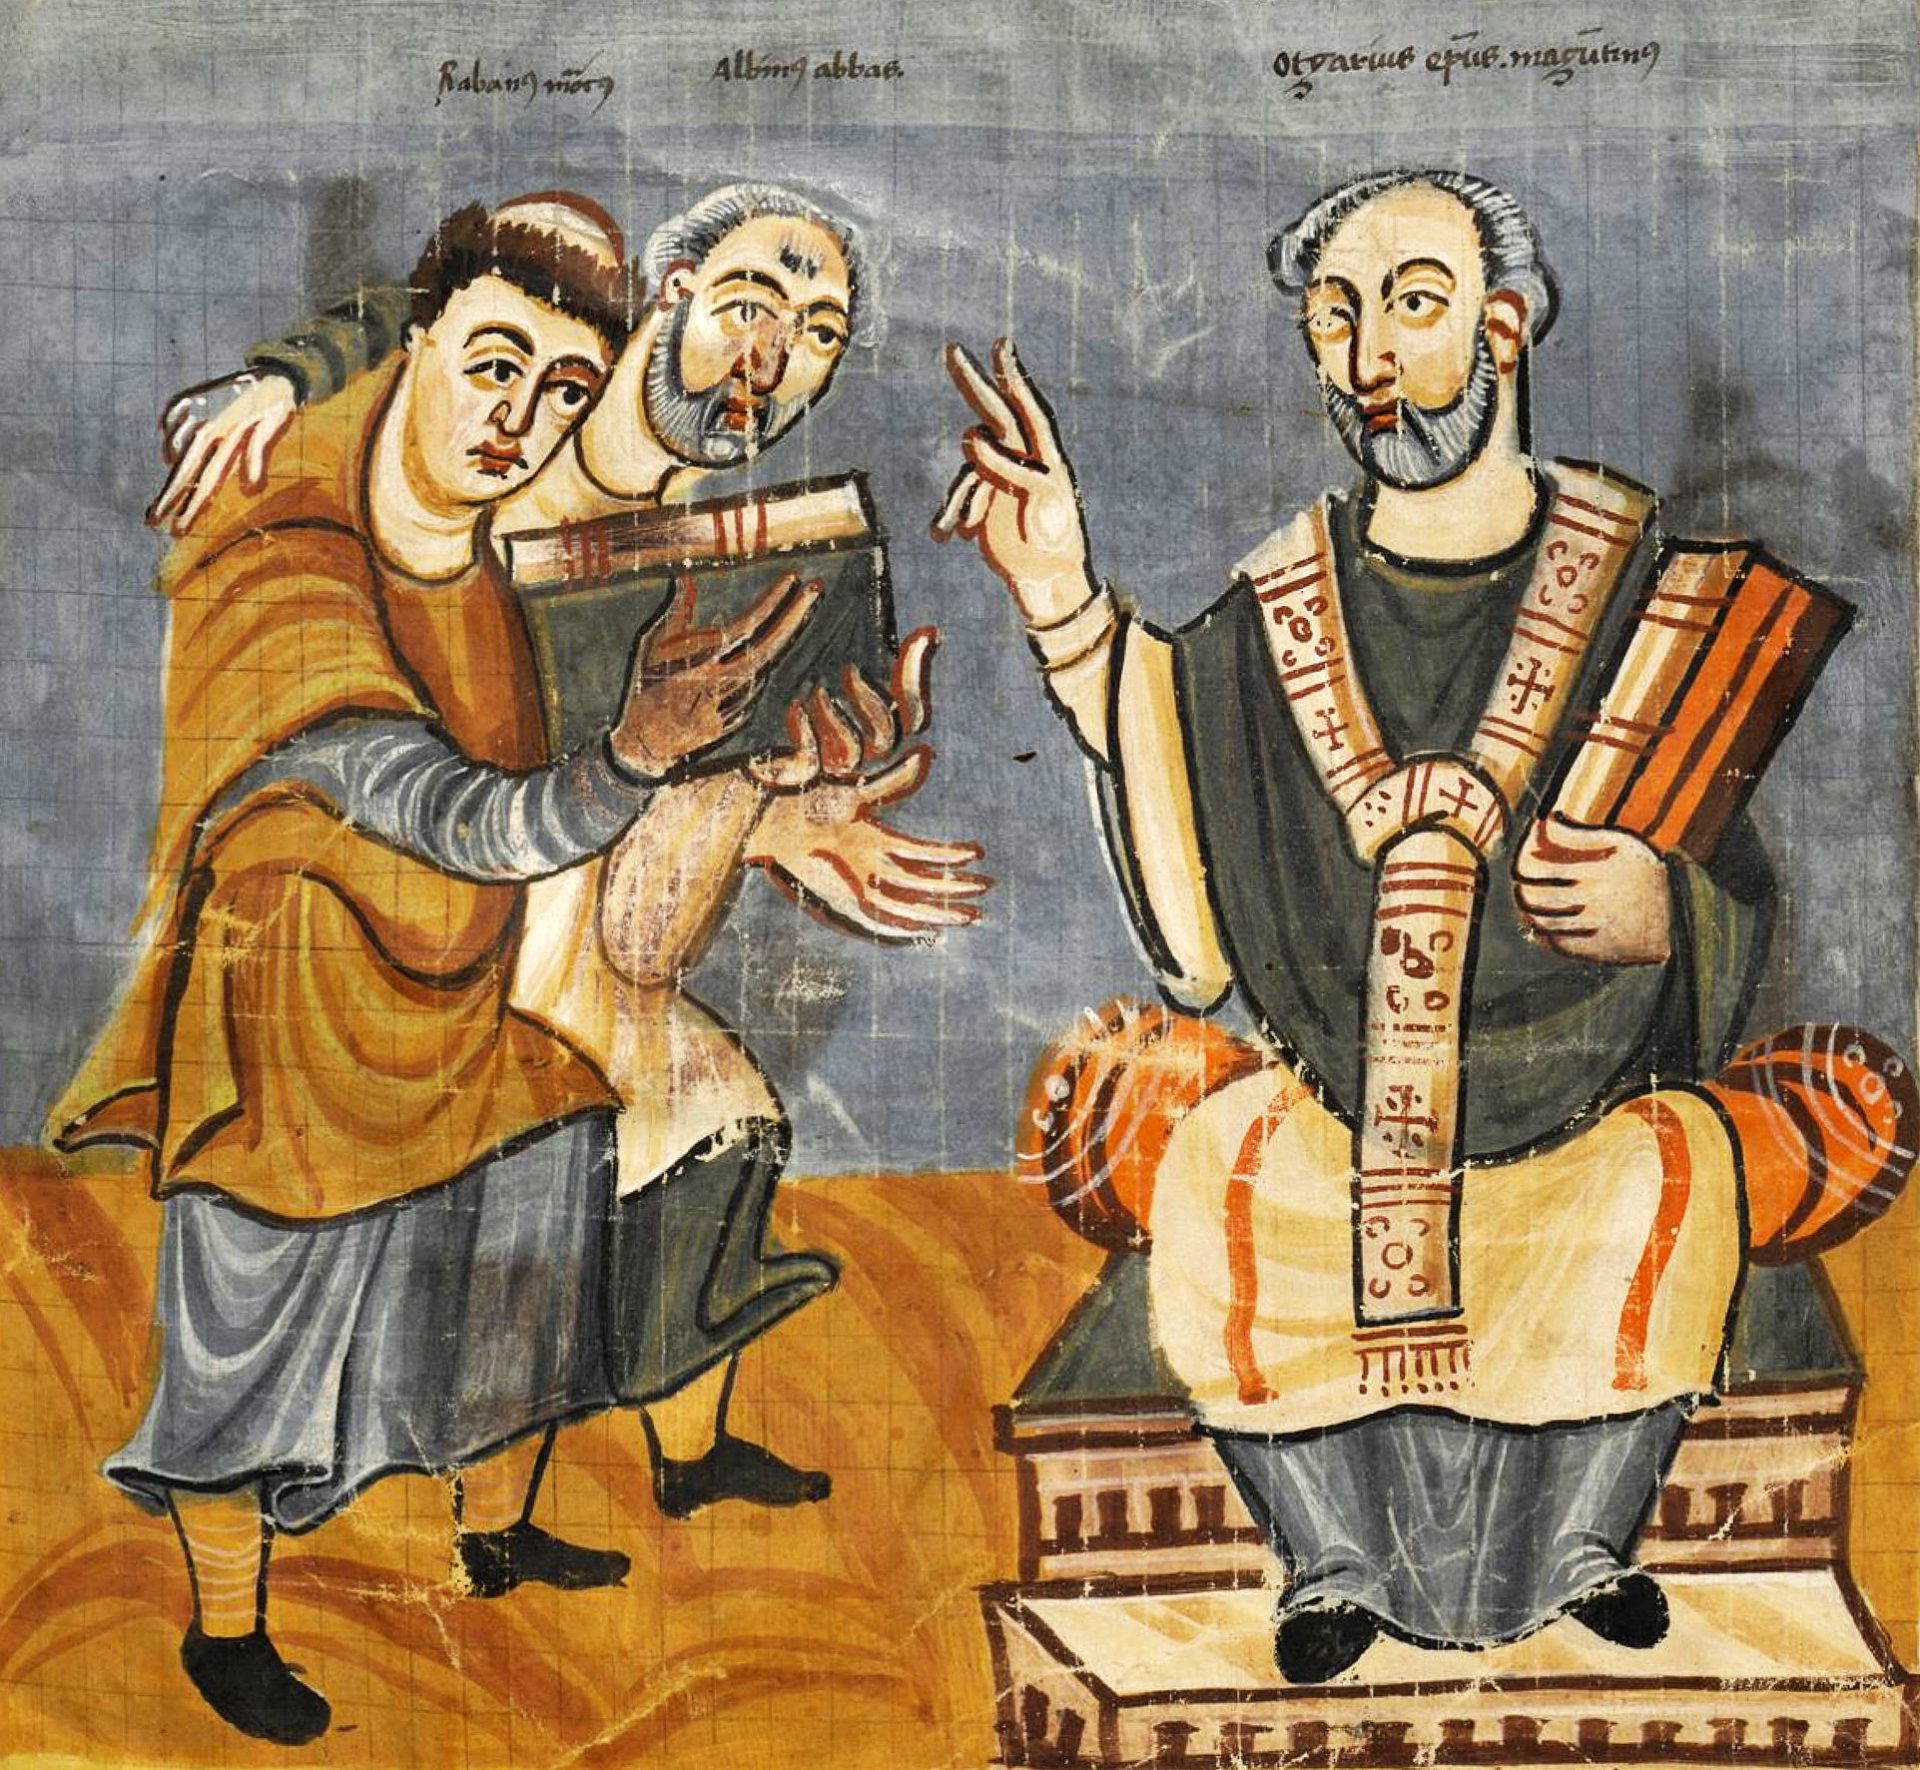 A medieval manuscript illustration with three figures. The figure on the left is Raban Maur. The figure in the center is Alcuin, a scholar and advisor to Charlemagne. The figure on the right is Otgar, the archbishop of Mainz from 826 to 847.